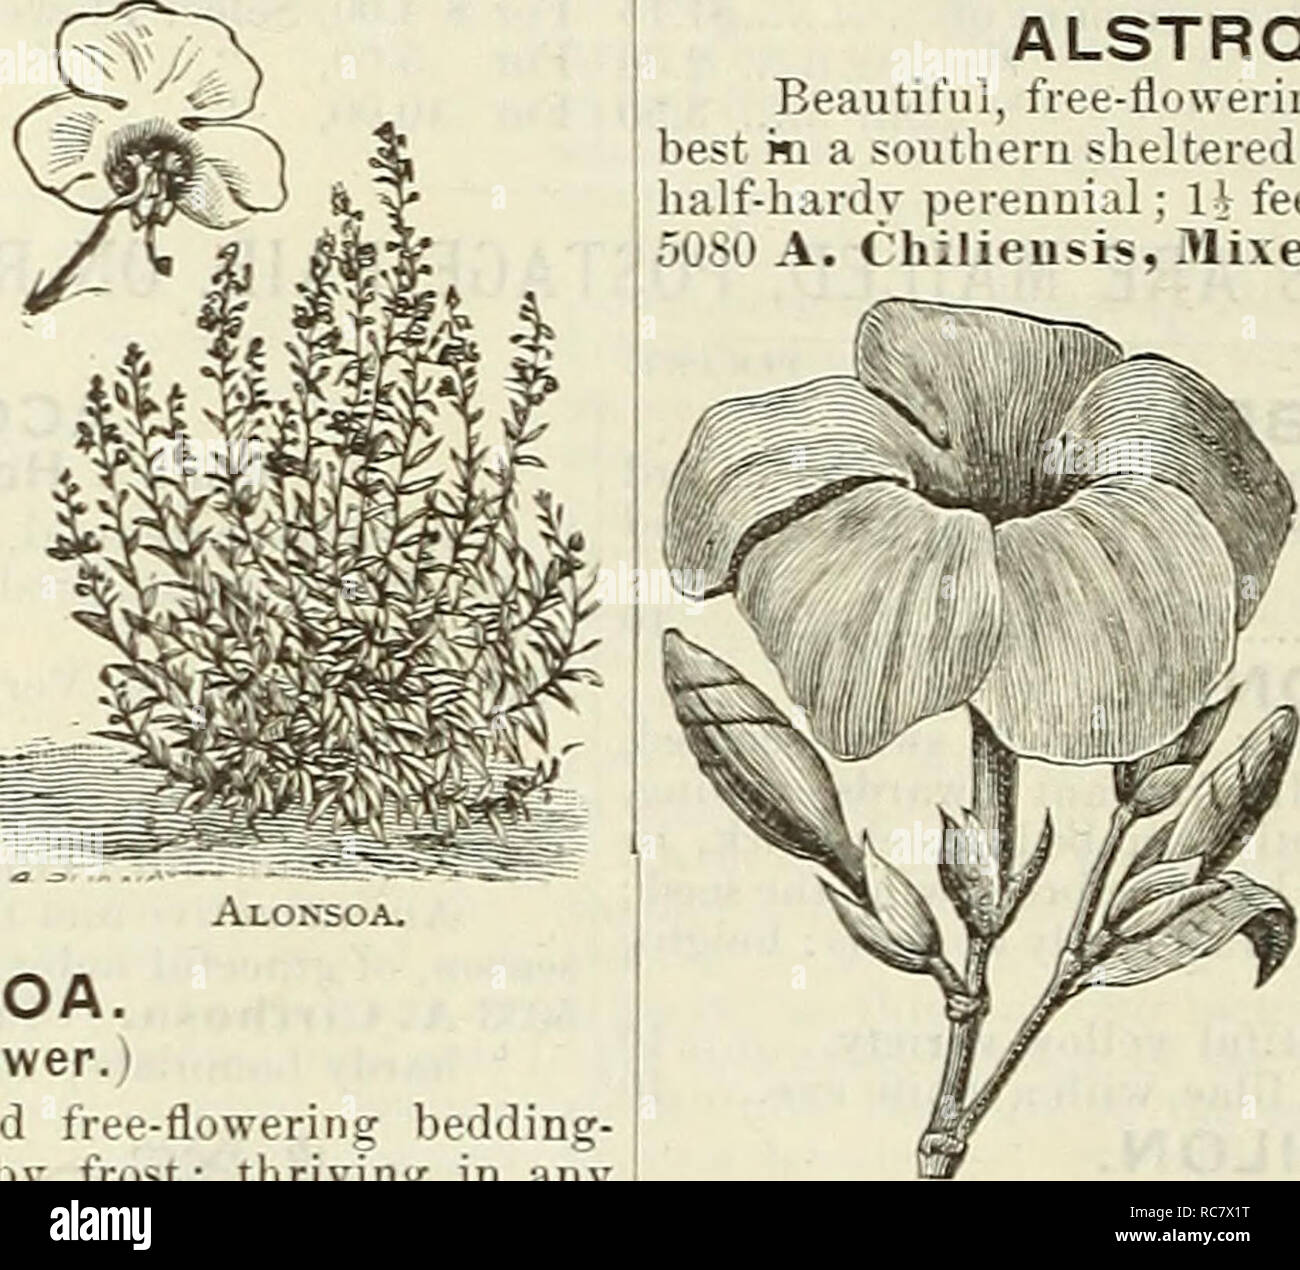 . Dreer's garden calendar for 1888. Seeds Catalogs; Nursery stock Catalogs; Gardening Catalogs; Flowers Seeds Catalogs. Agrostemma. ALONSOA. (Mask Flower. I Handsome brilliant-colored free-flowering bedding- giants, blooming until killed by frost; thriving in any .good garden soil, also good house-plants ; half-hardy an- nuals. 5065 A. Grandiflora. Large-flowering; bright-scarlet; 2 feet 5 5070— Mixed. All colors ; 2 feet 5. A LYSSU M—Continued. 50S7 A. Little Gem. This is an exceedingly pretty and entirely distinct dwarf variety of Sweet Alvs- sum. The plants are of very dwarf, compact, sprea Stock Photo